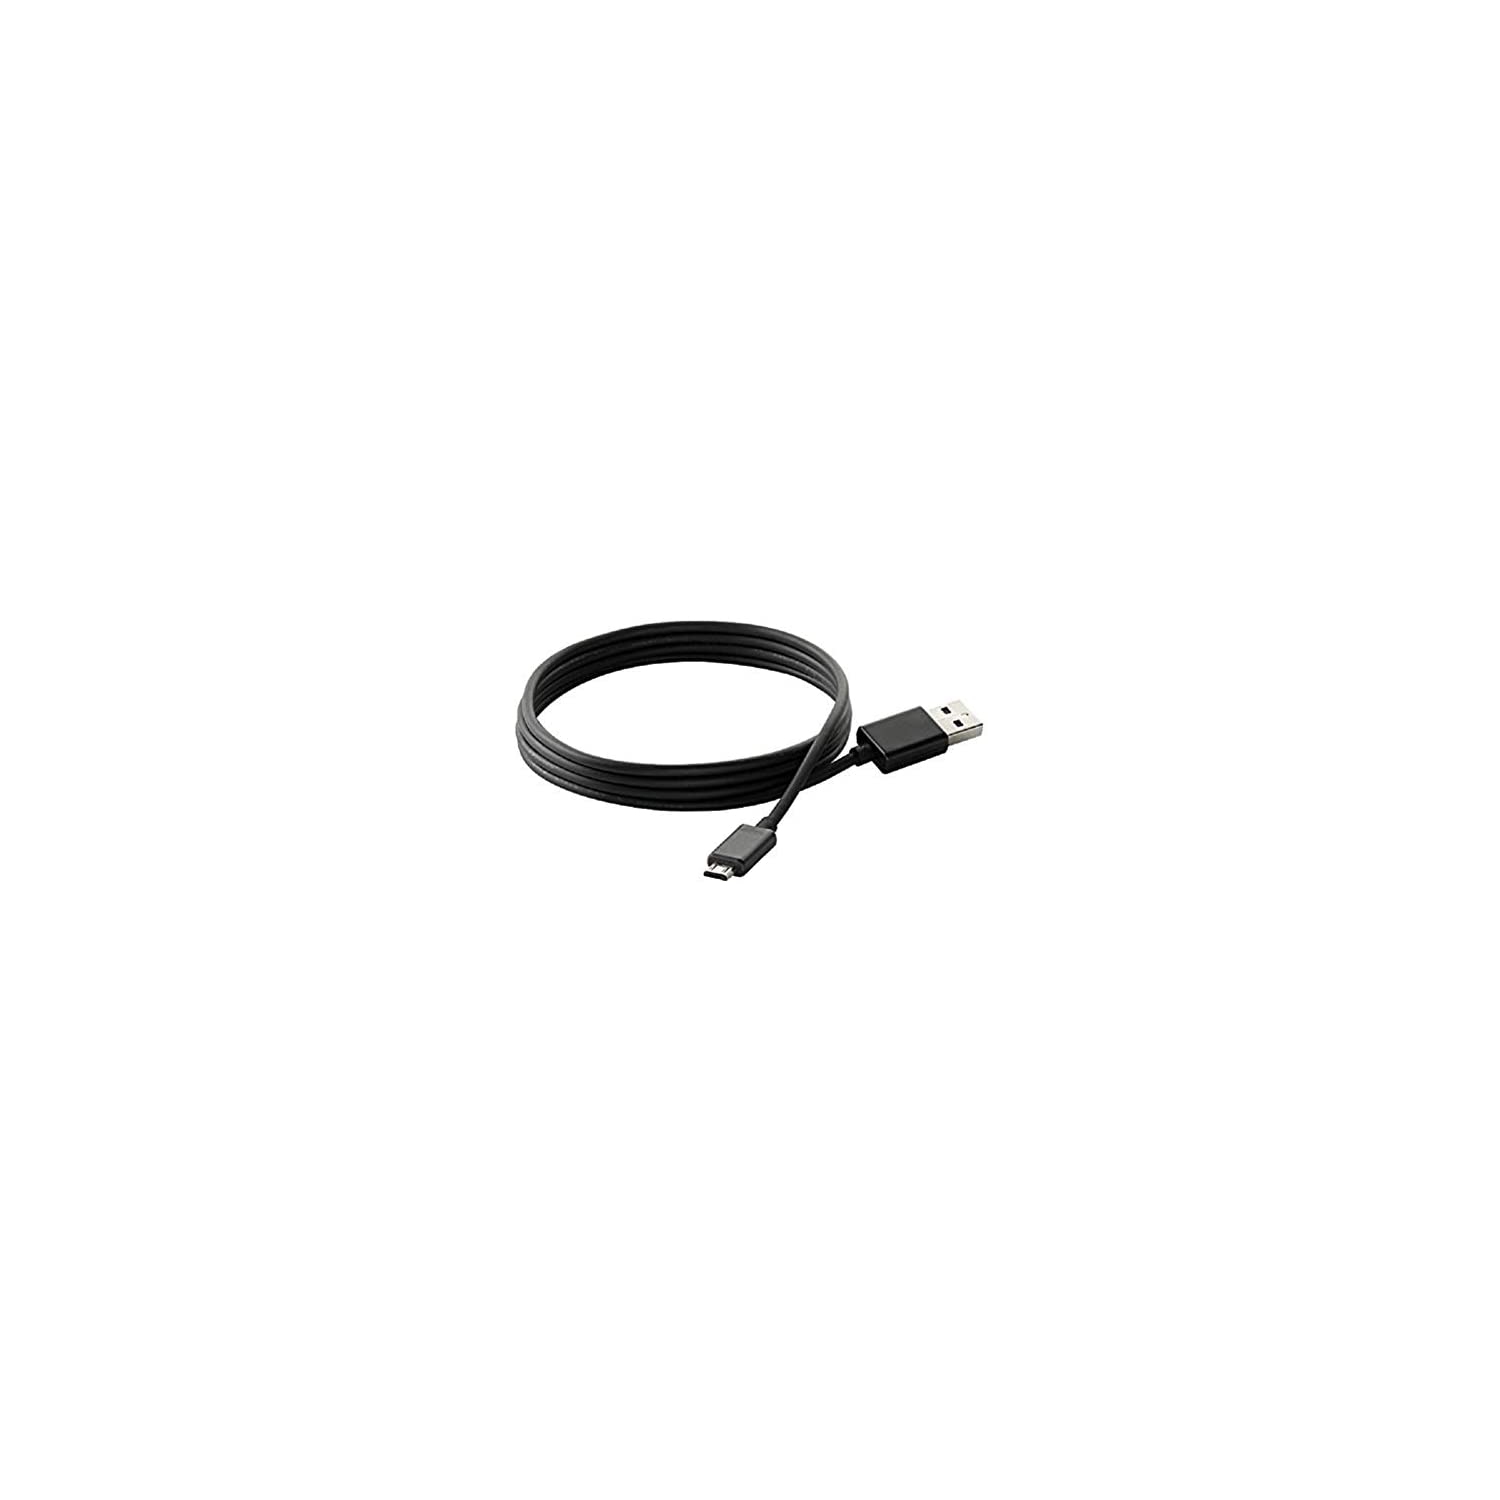 Samsung Camera SeattleTech Basic Black Micro USB Cables Charger Cord Sync for Android 5 PK and Many Other Devices 